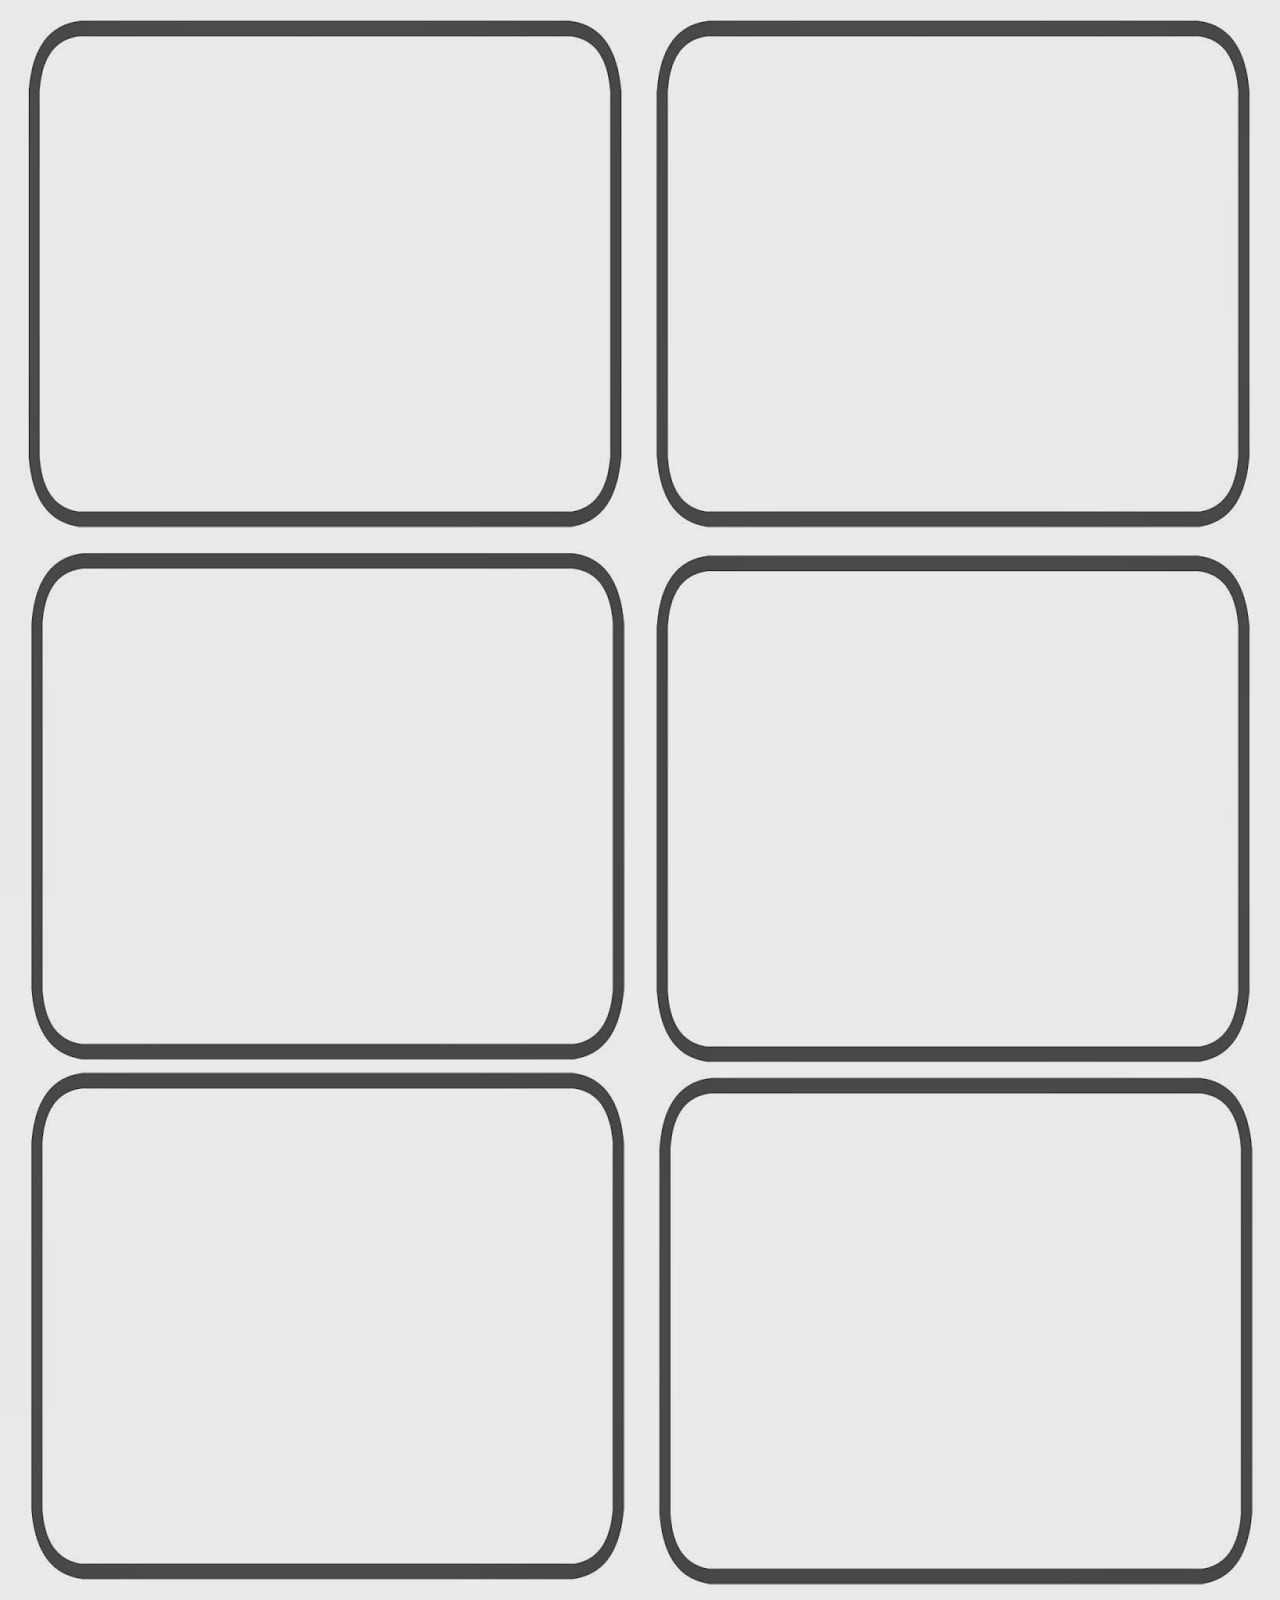 175938B Game Card Template | Wiring Resources Intended For Blank Playing Card Template